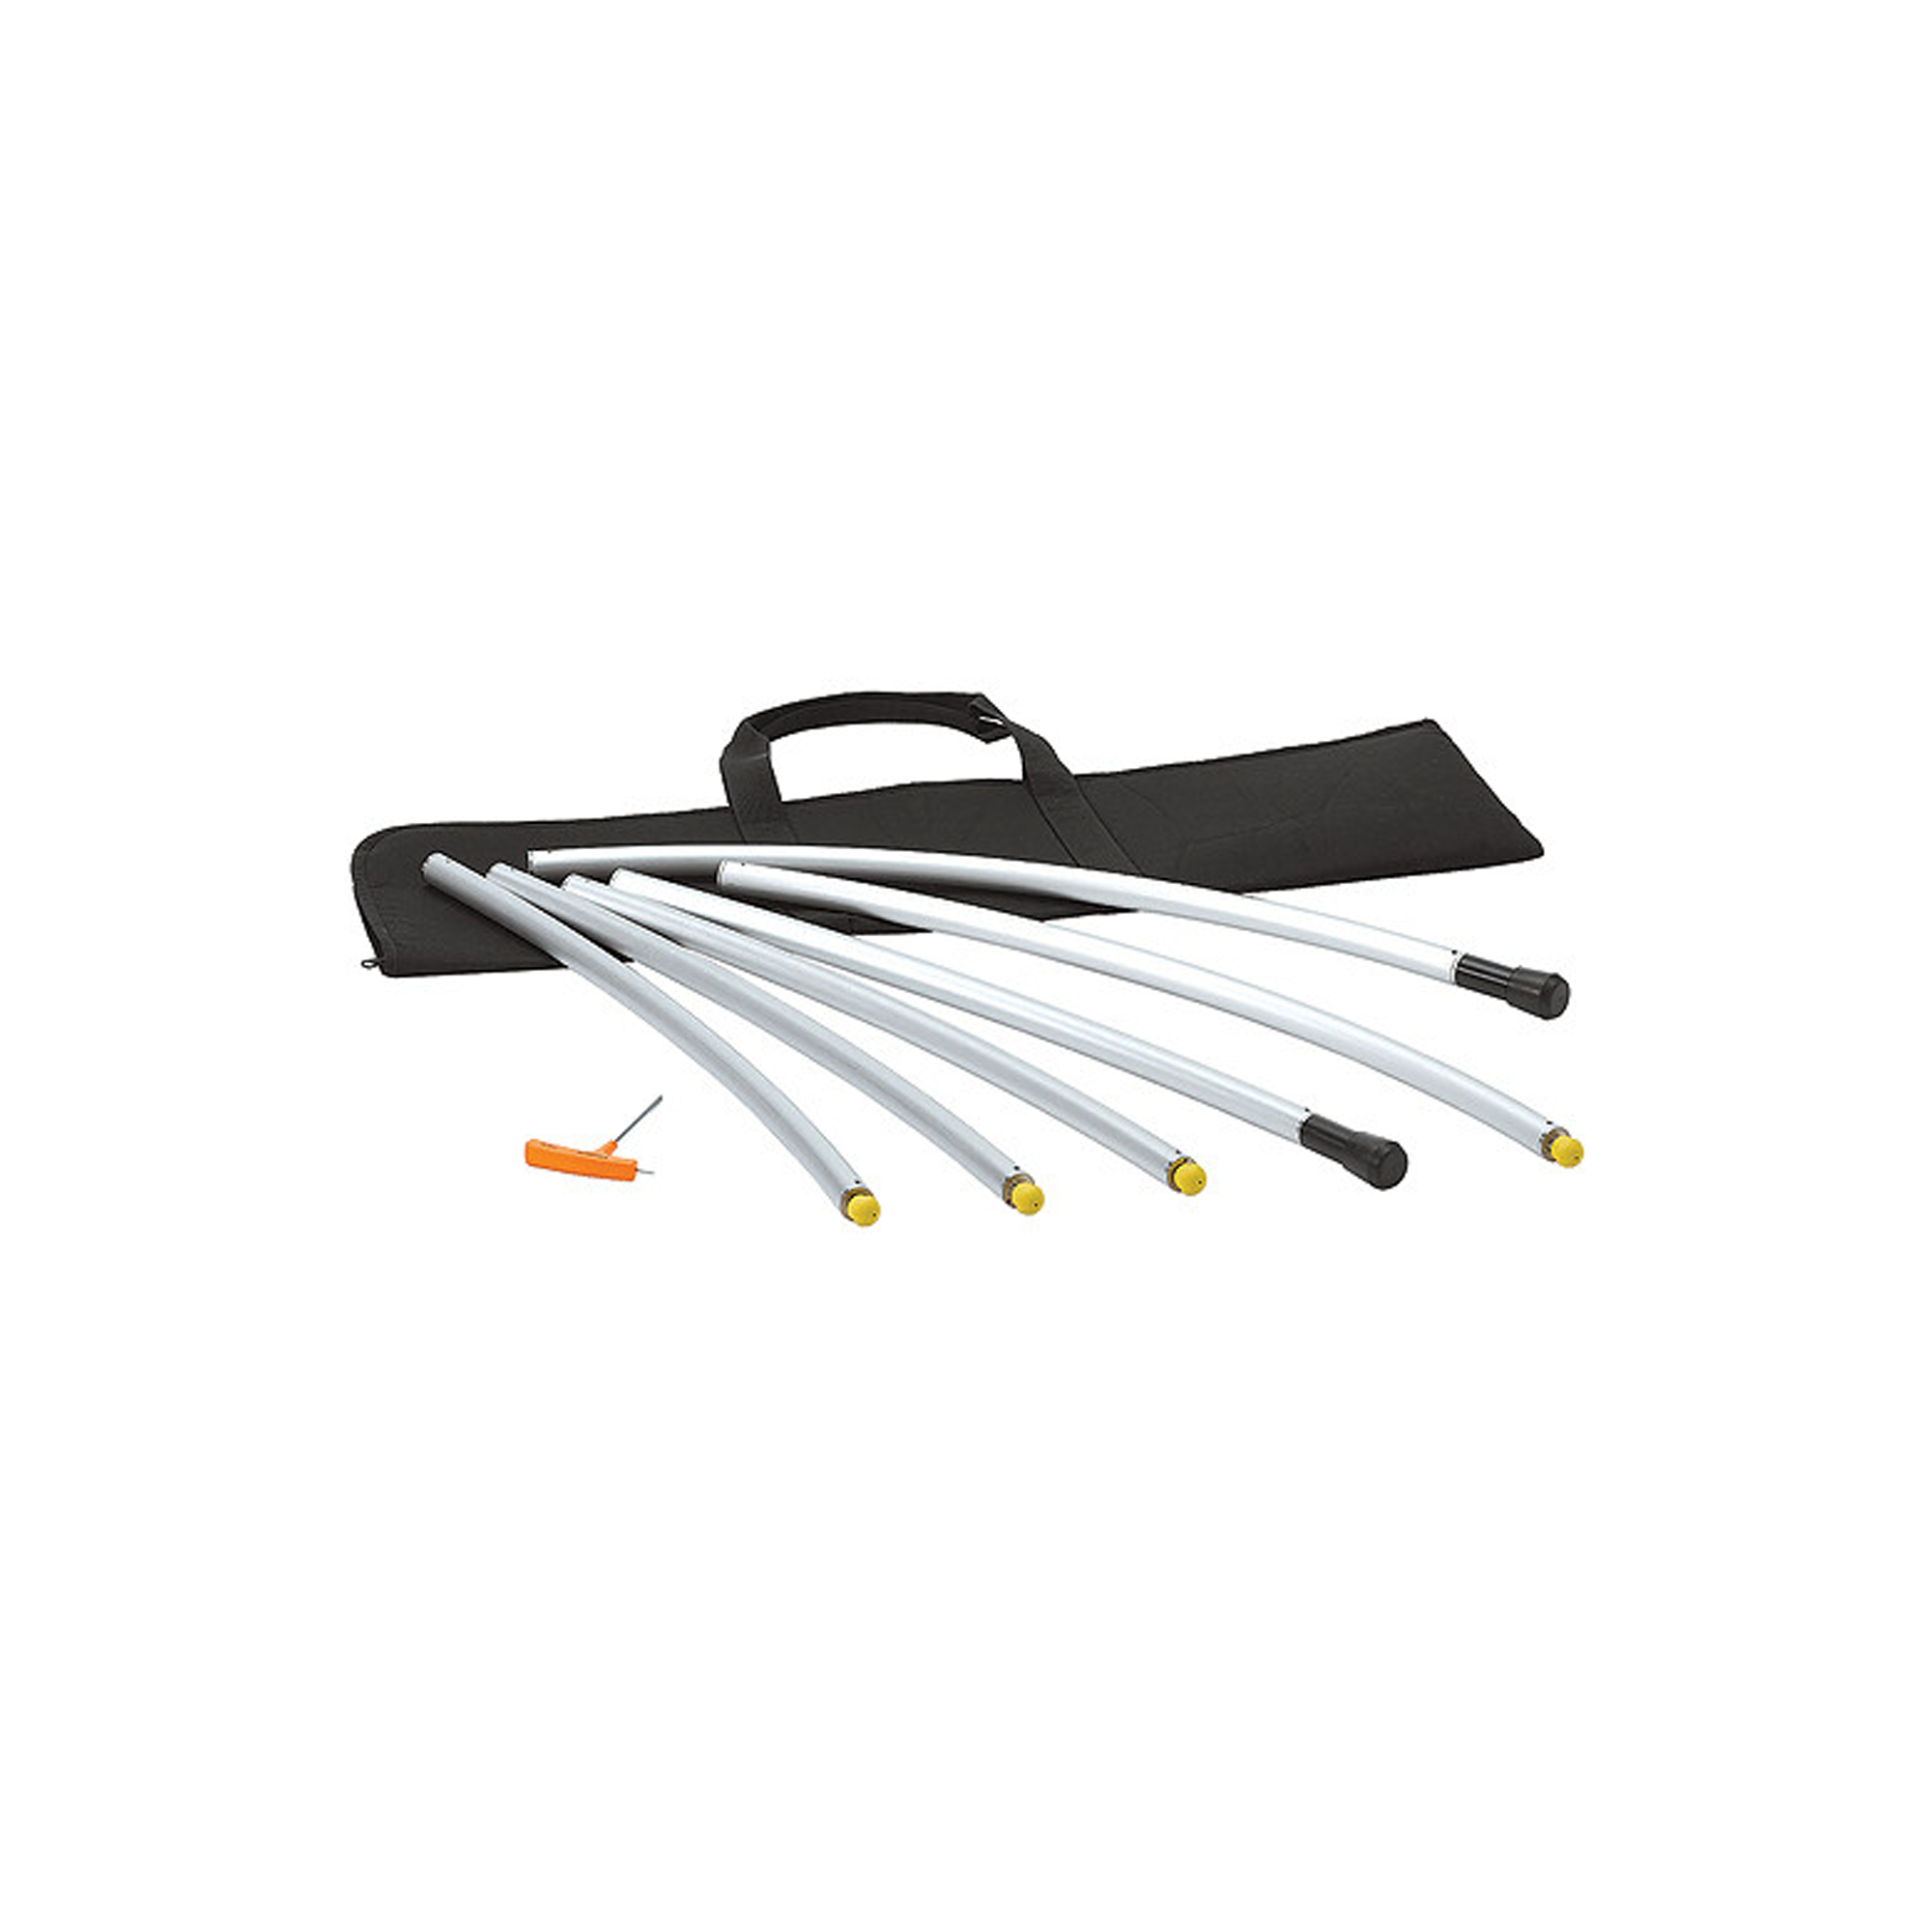 Libec 90 degrees curved rail with carrying case